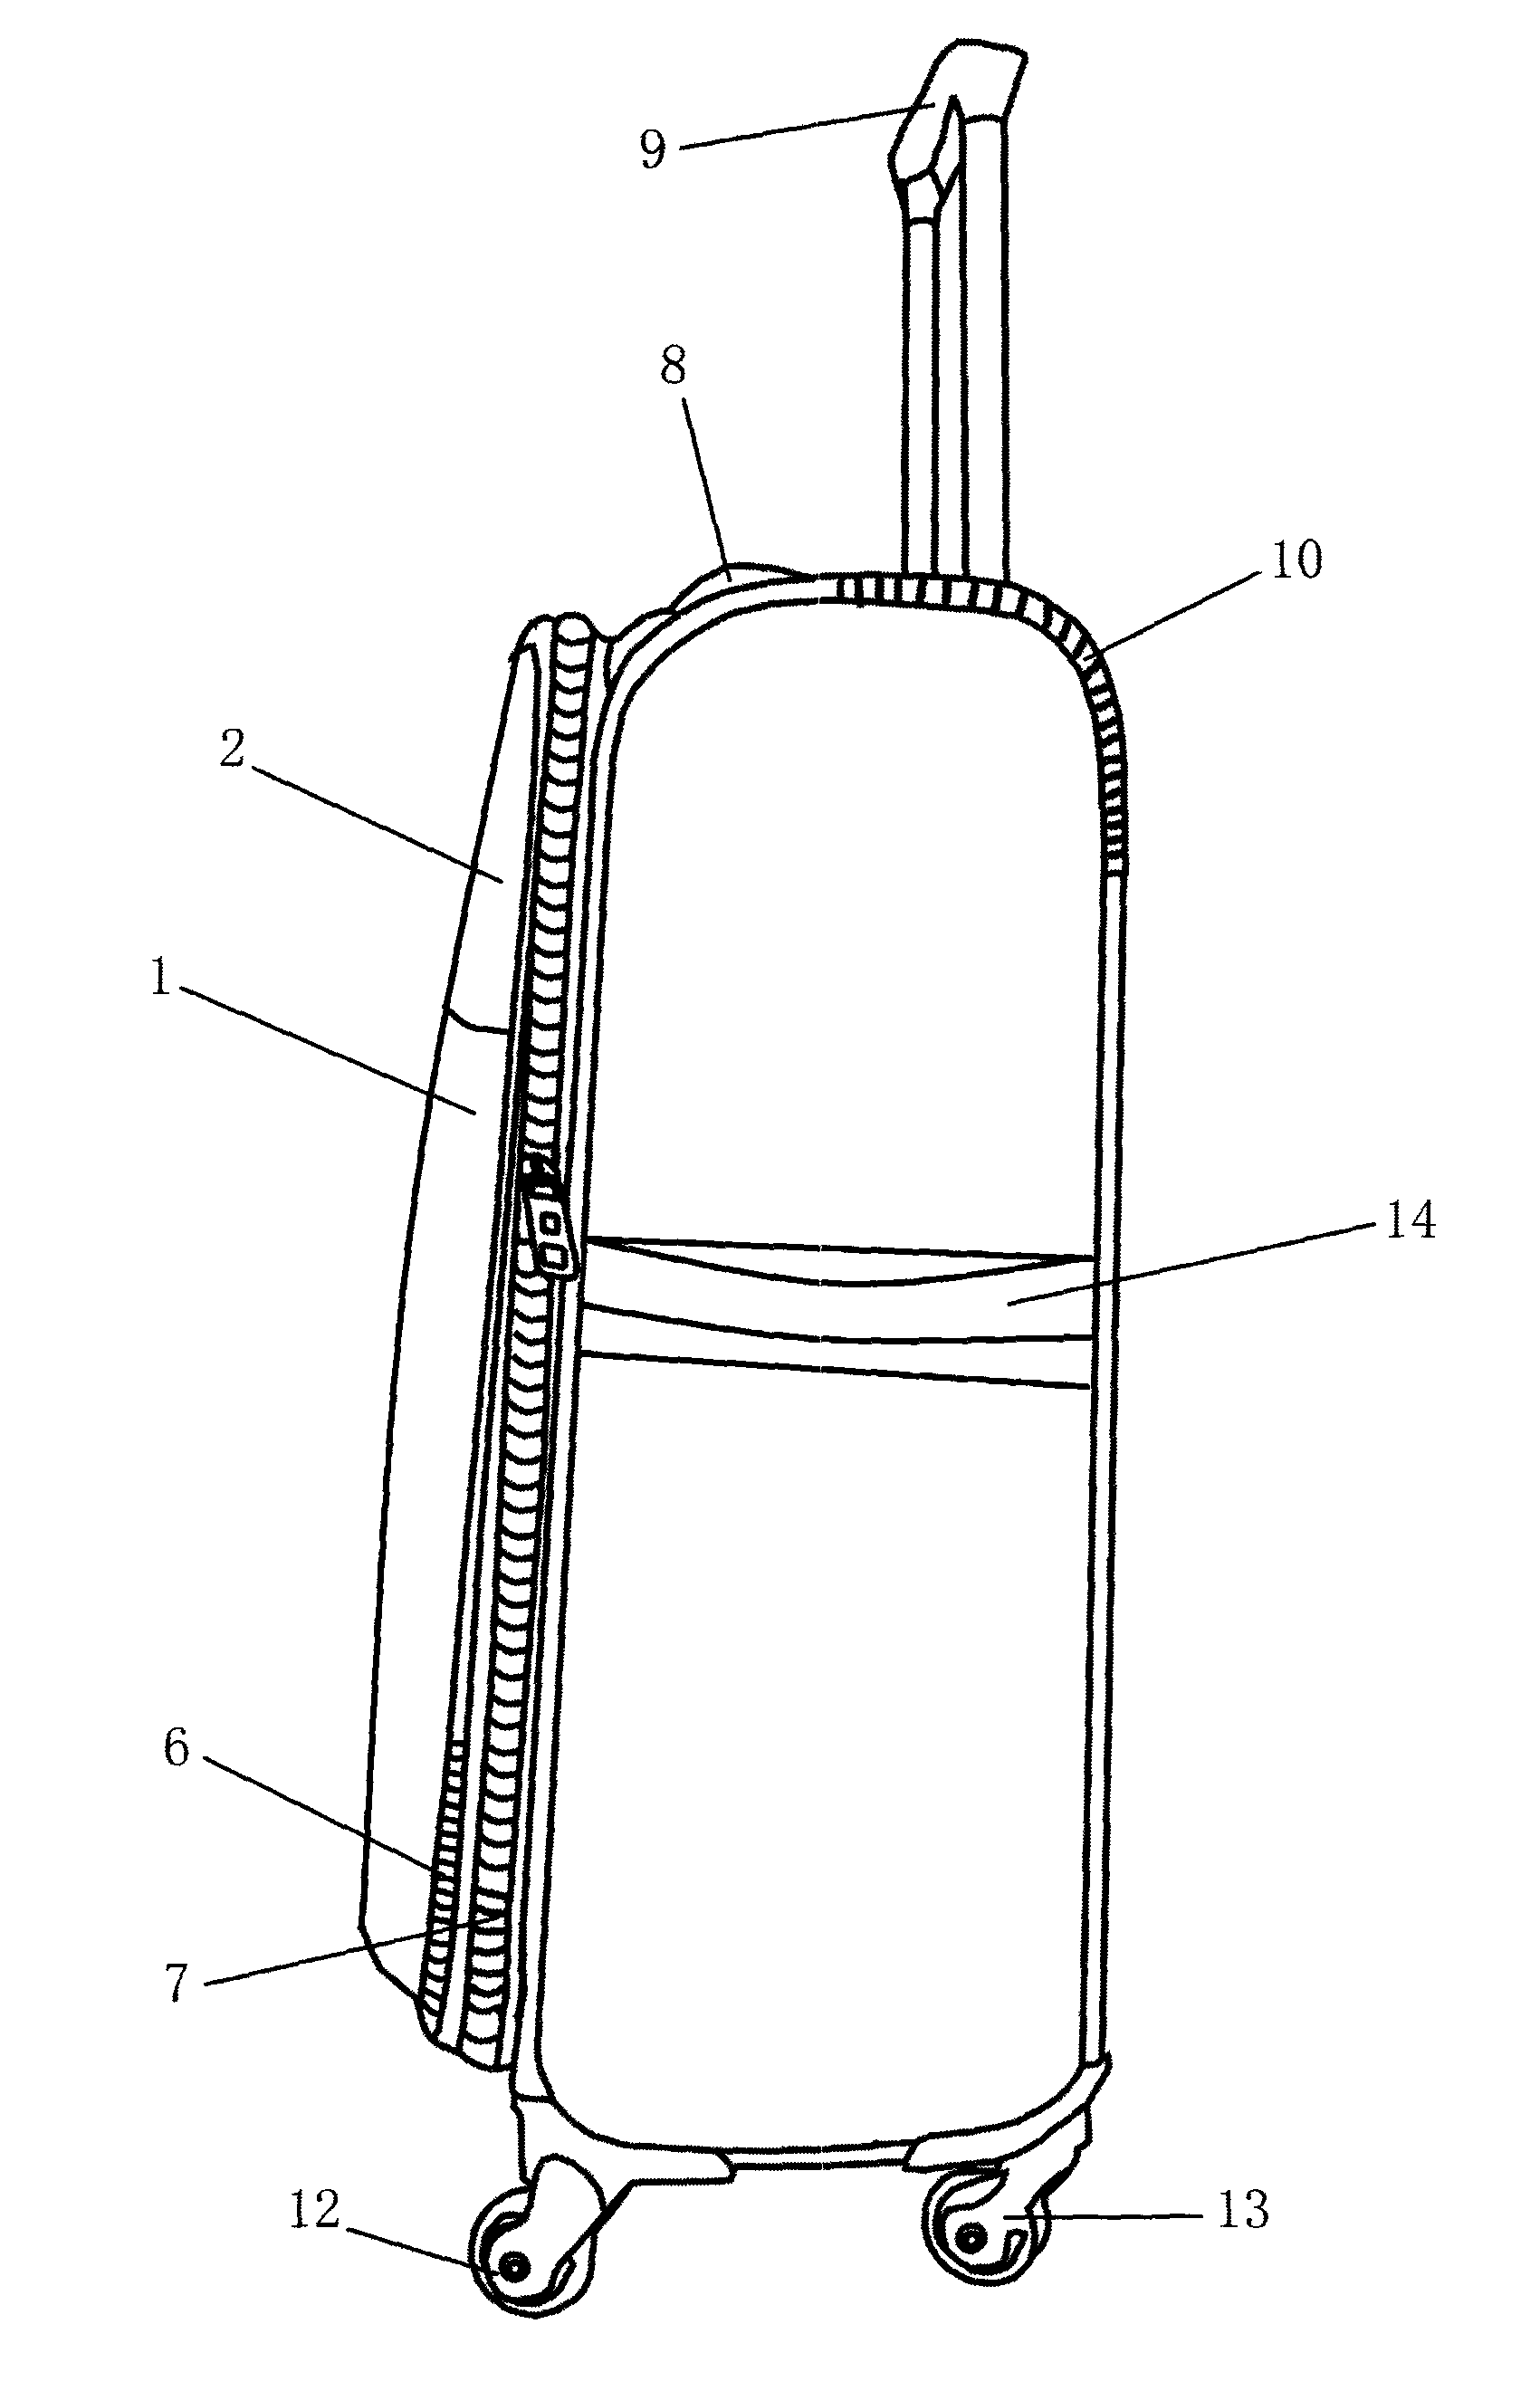 Draw-bar box with front inserting pocket